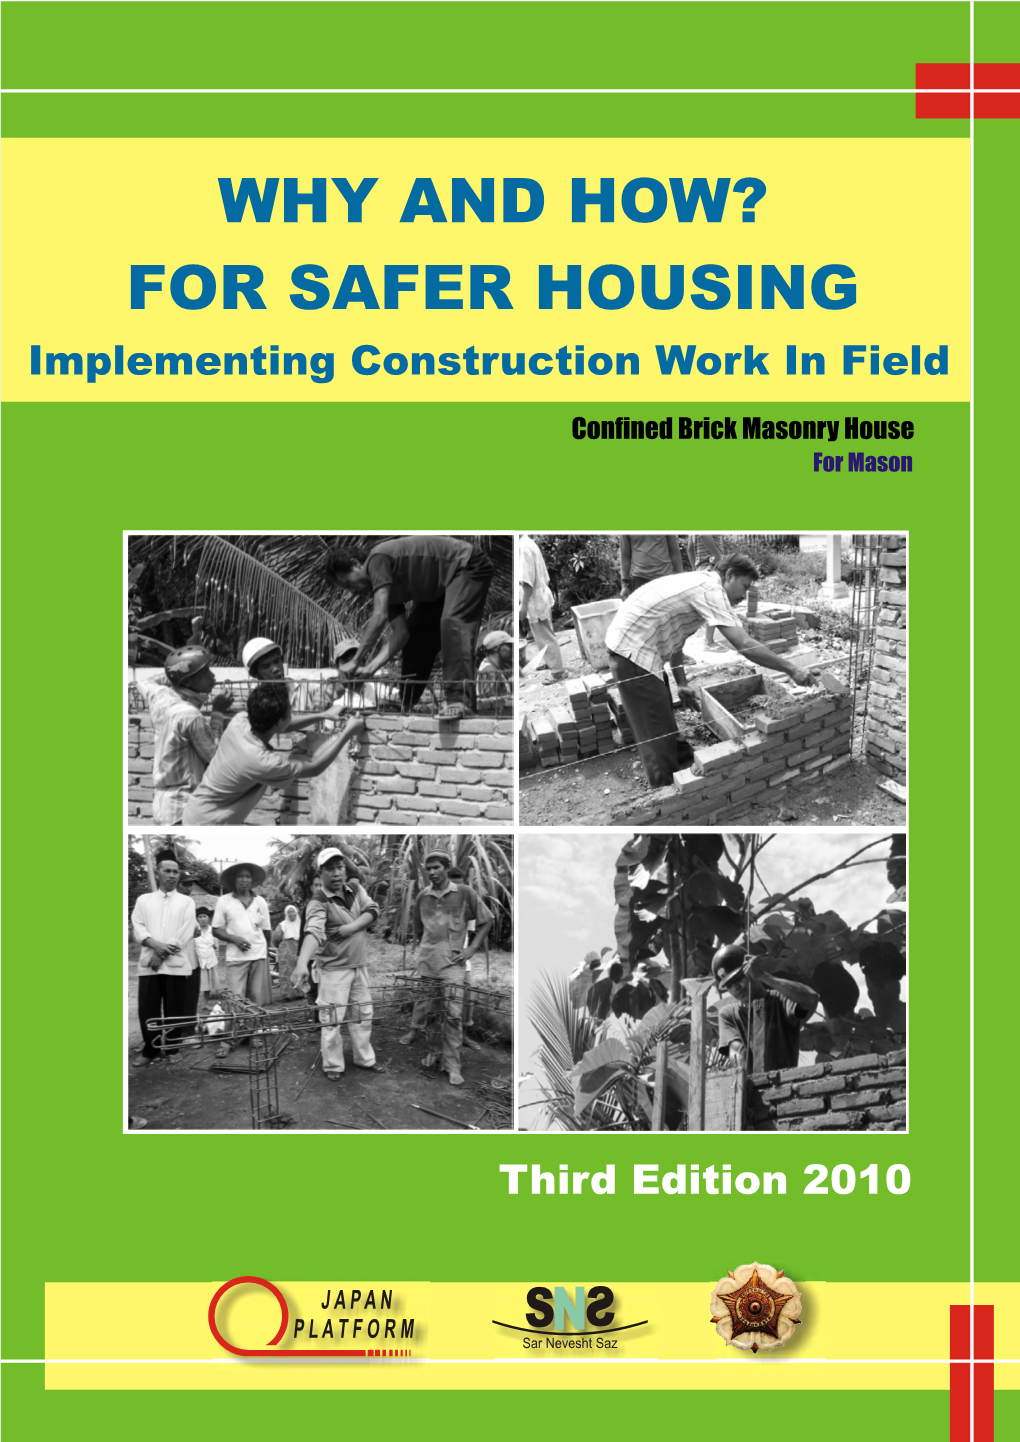 FOR SAFER HOUSING Implementing Construction Work in Field